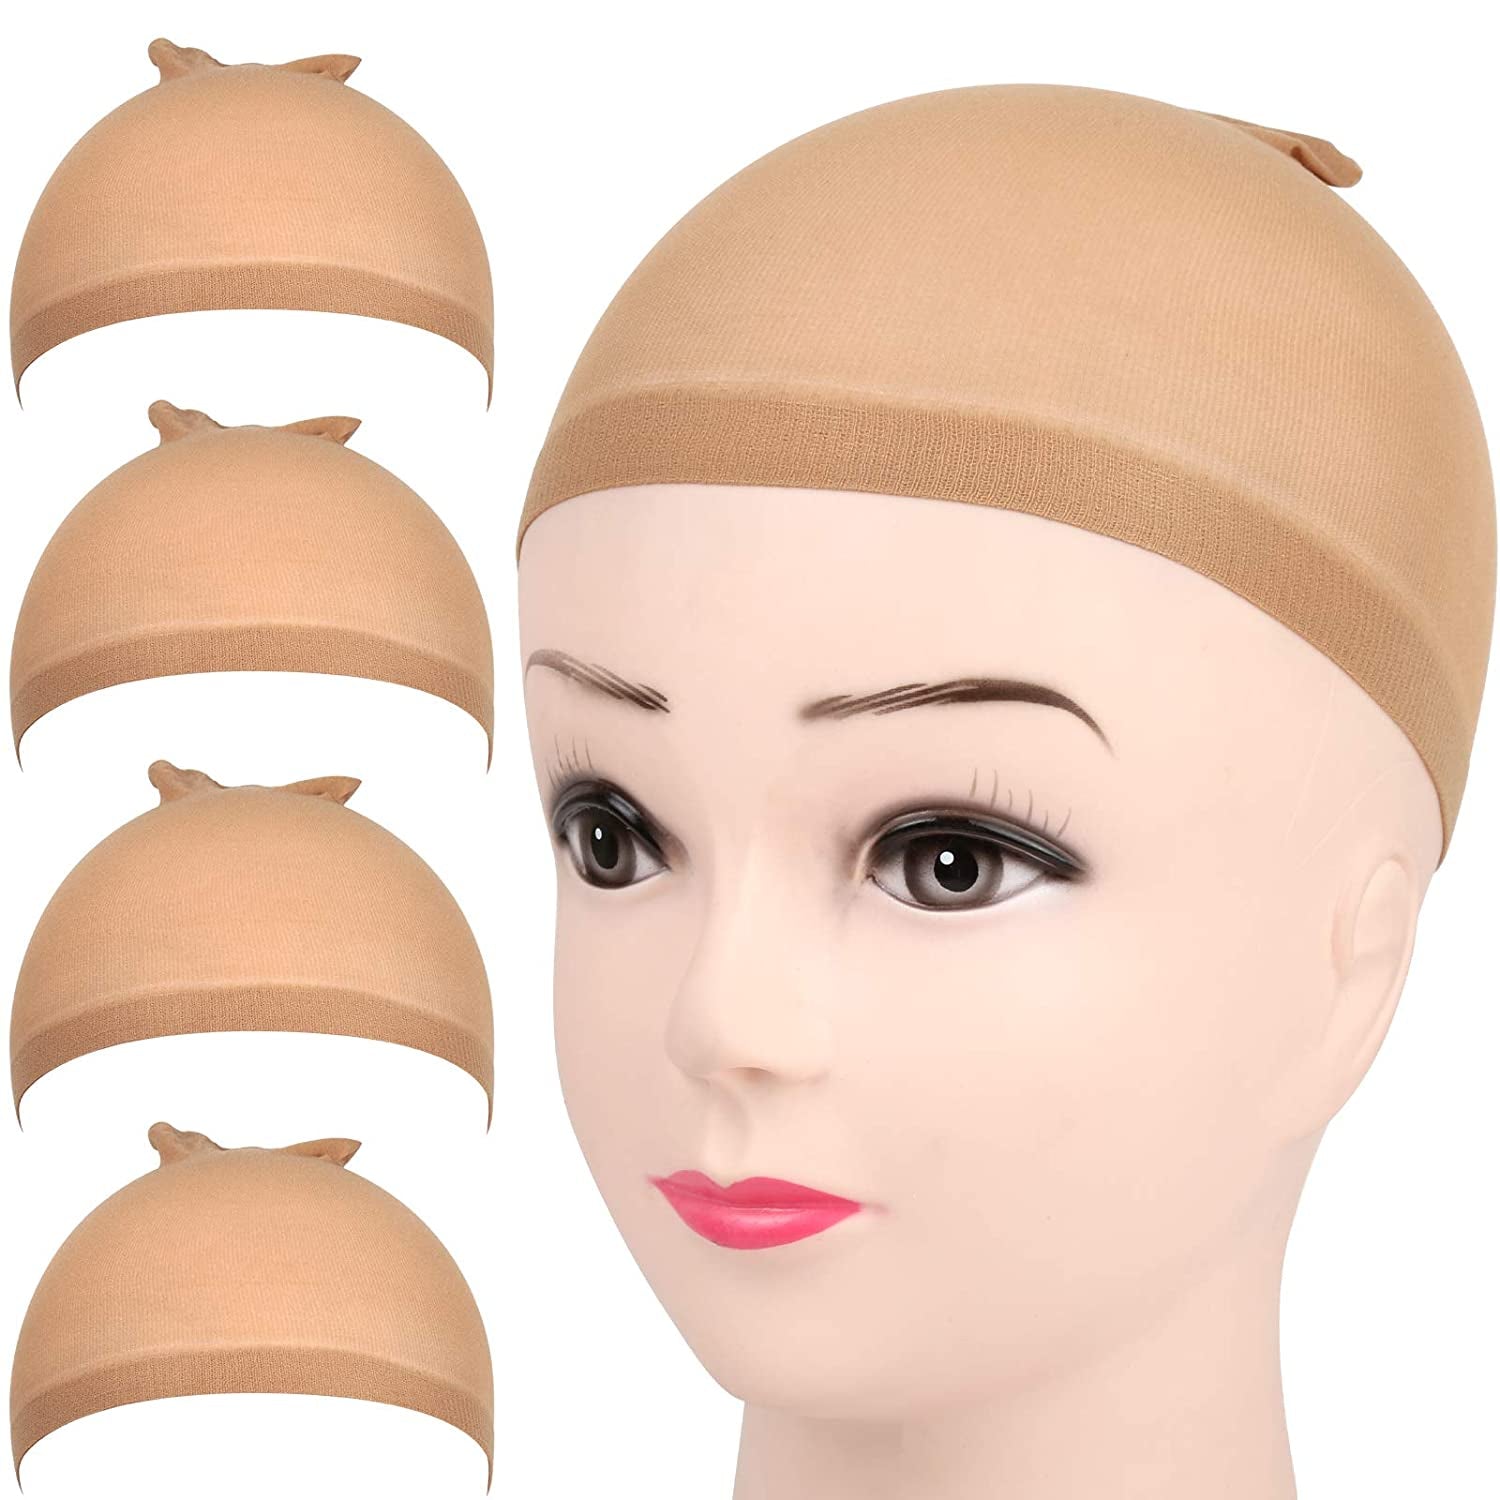 4 Pieces Light Brown Stocking Wig Caps Stretchy Nylon Wig Caps for Women